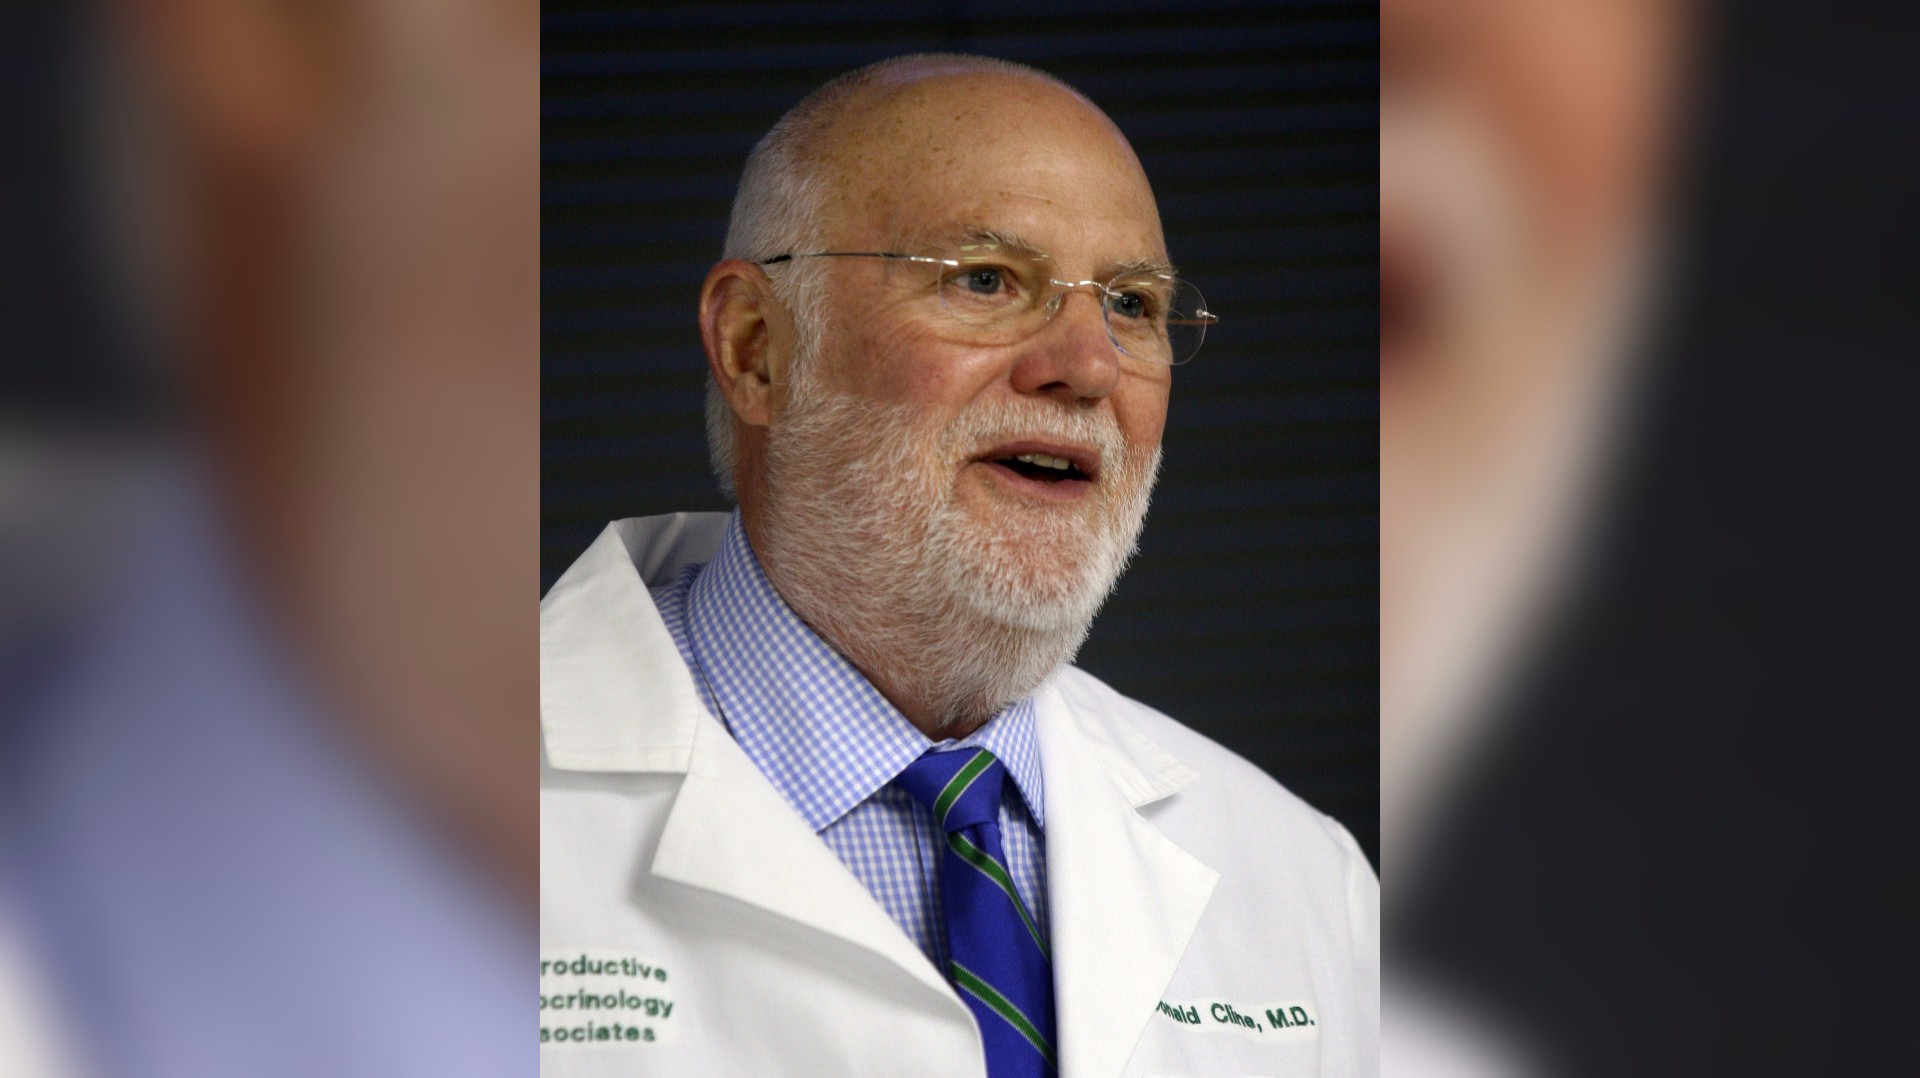 Fertility Doctor Accused Of Using Own Sperm To Inseminate Patients